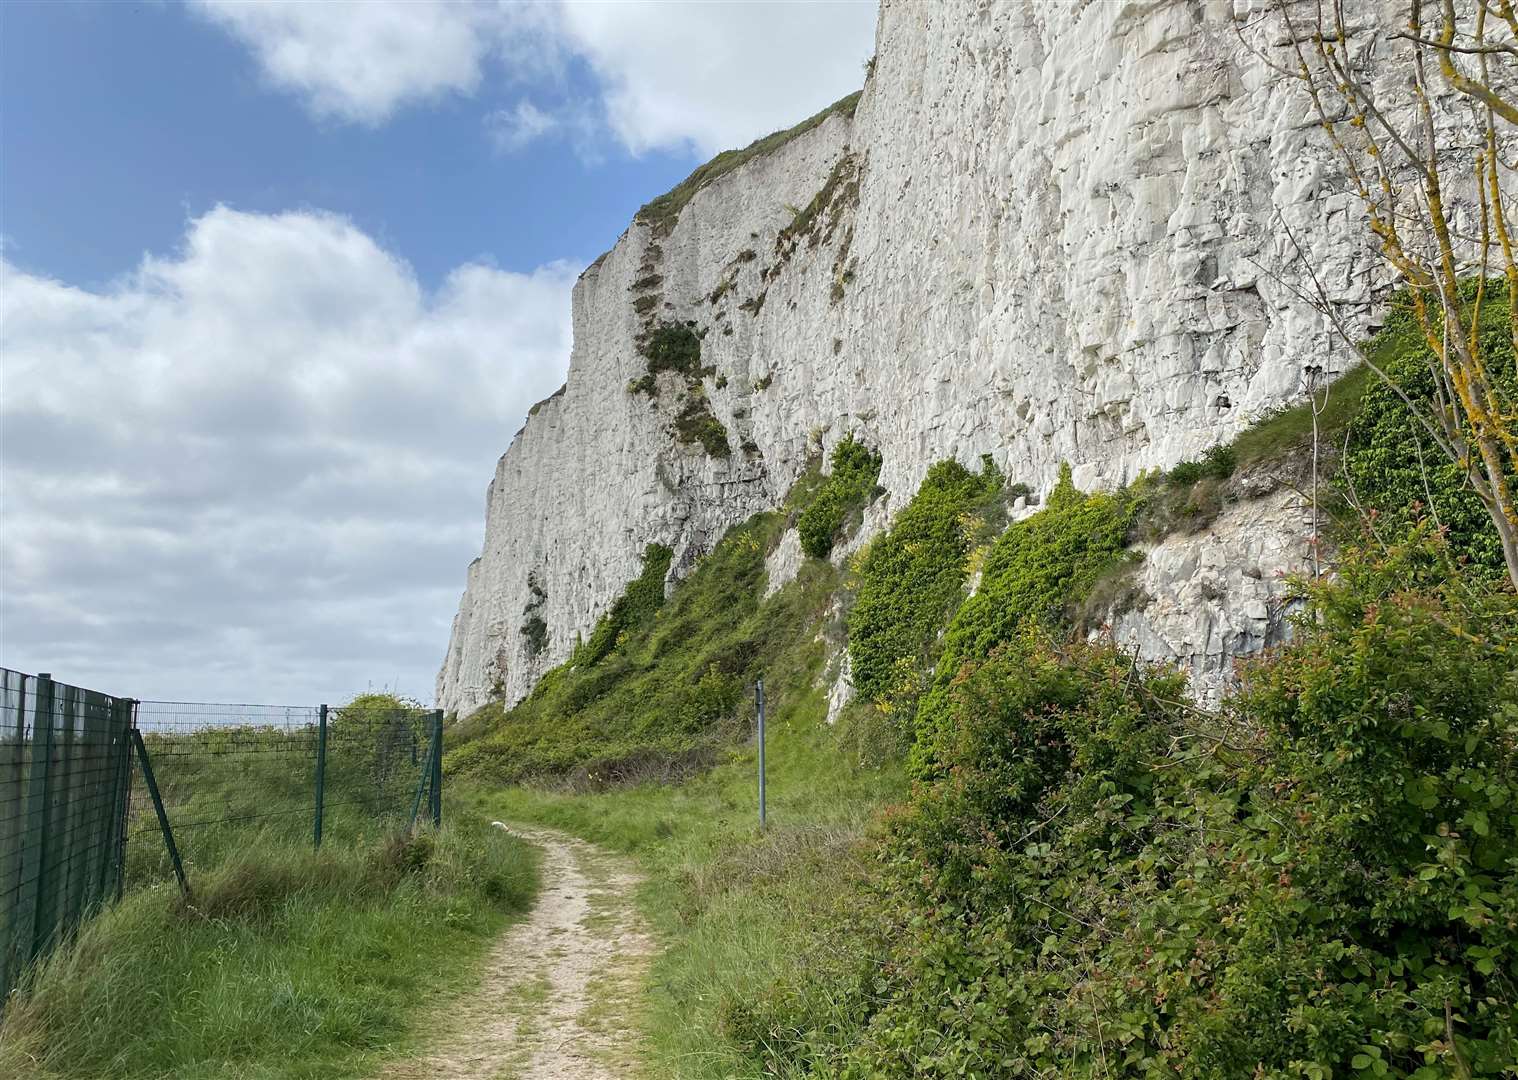 The cliffs at Kingsdown in Deal